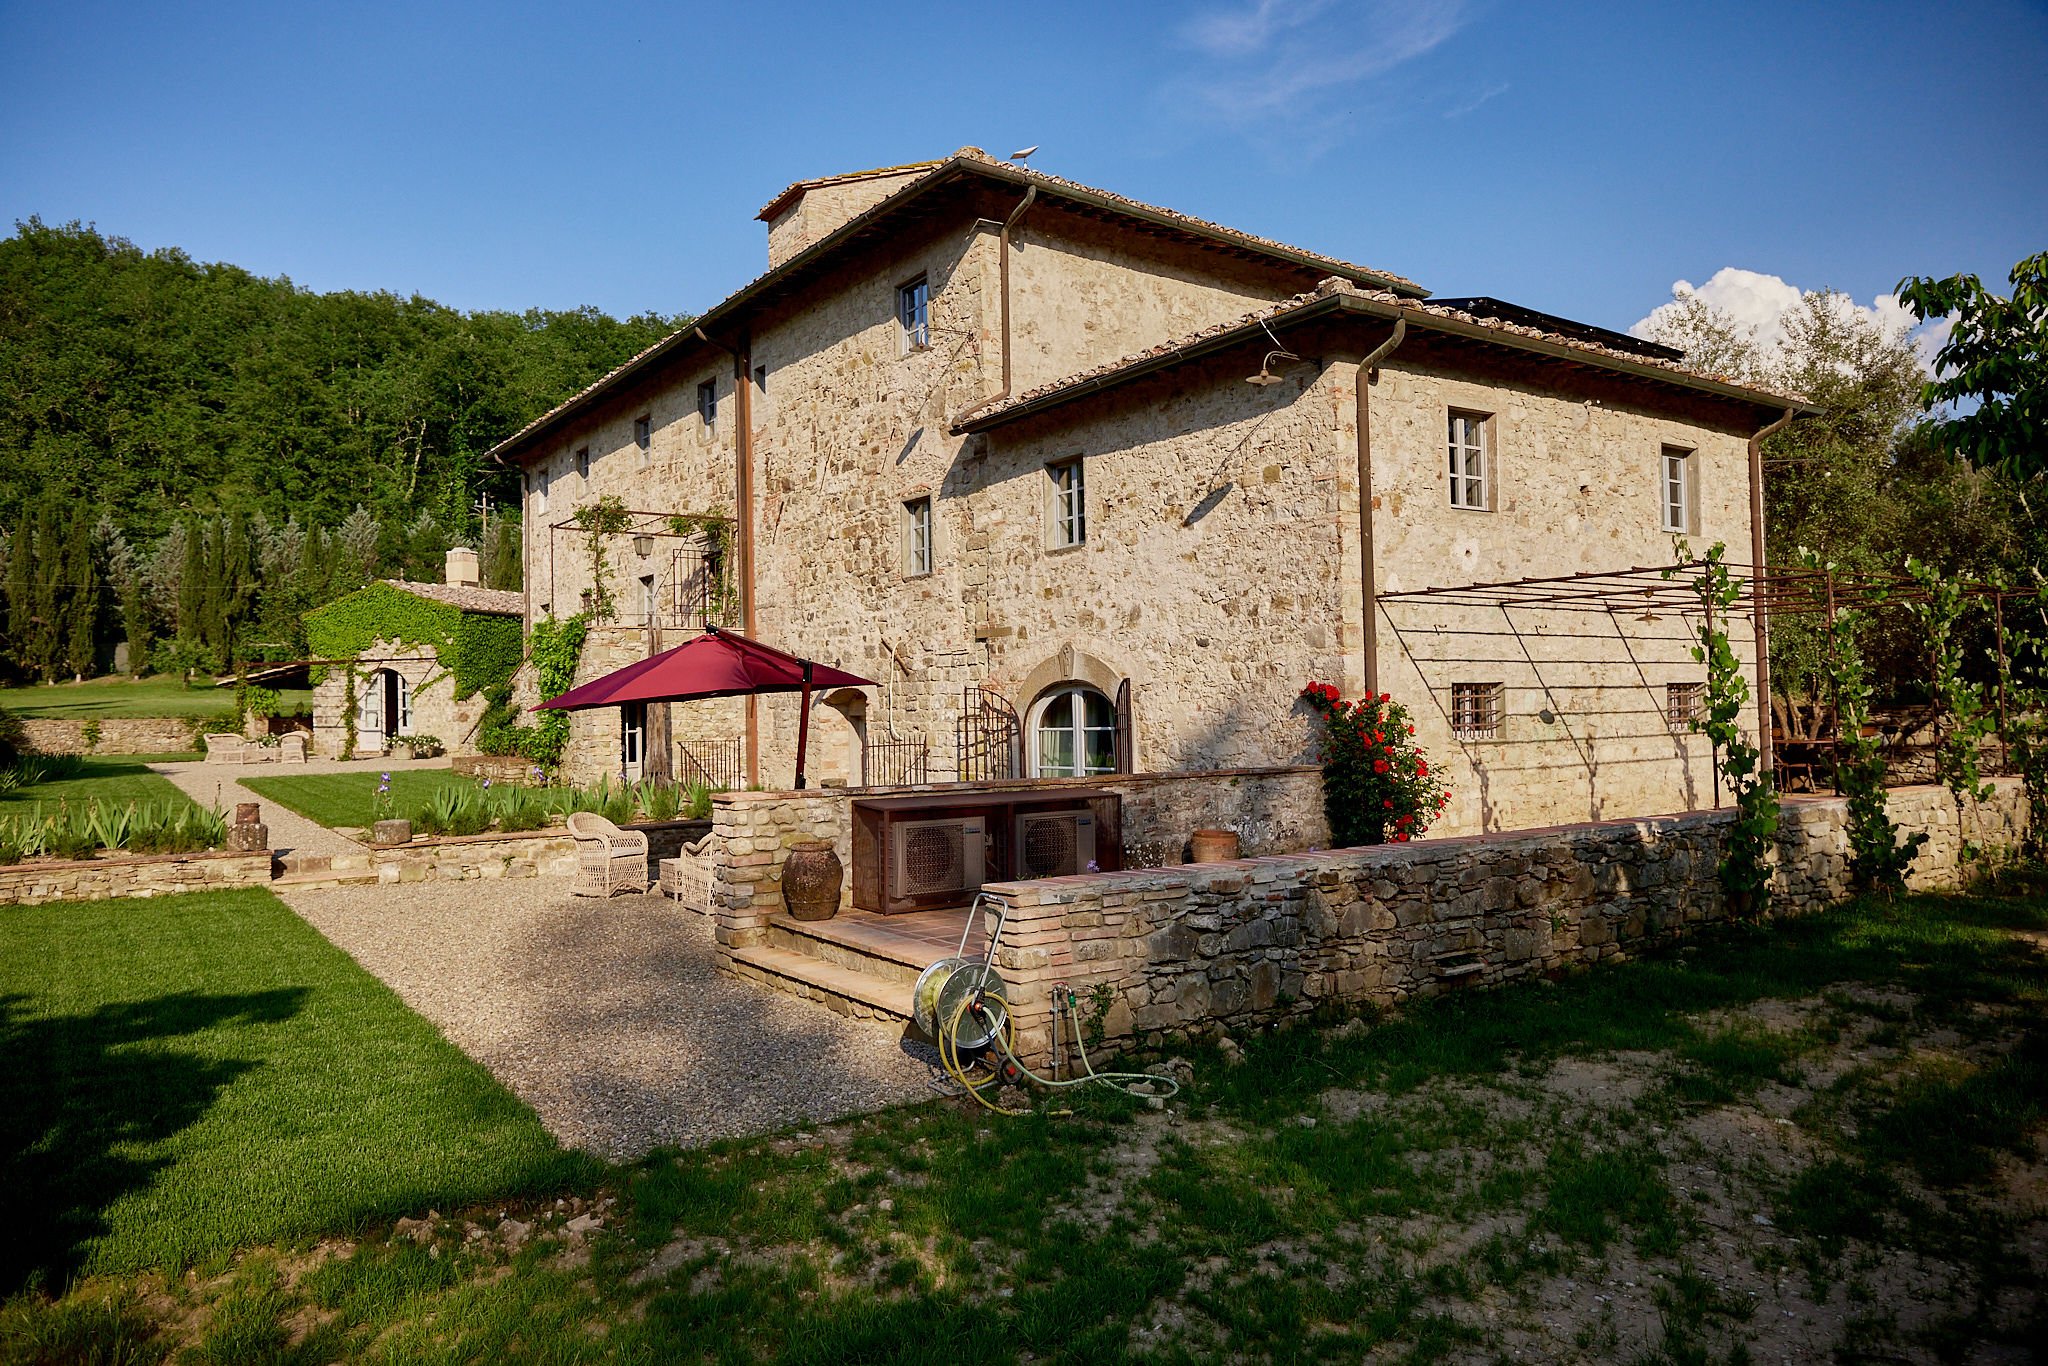 Francis York NEW Luxury Holiday Rental in the Chianti Hills, Tuscany Booking This Summer  37.jpg